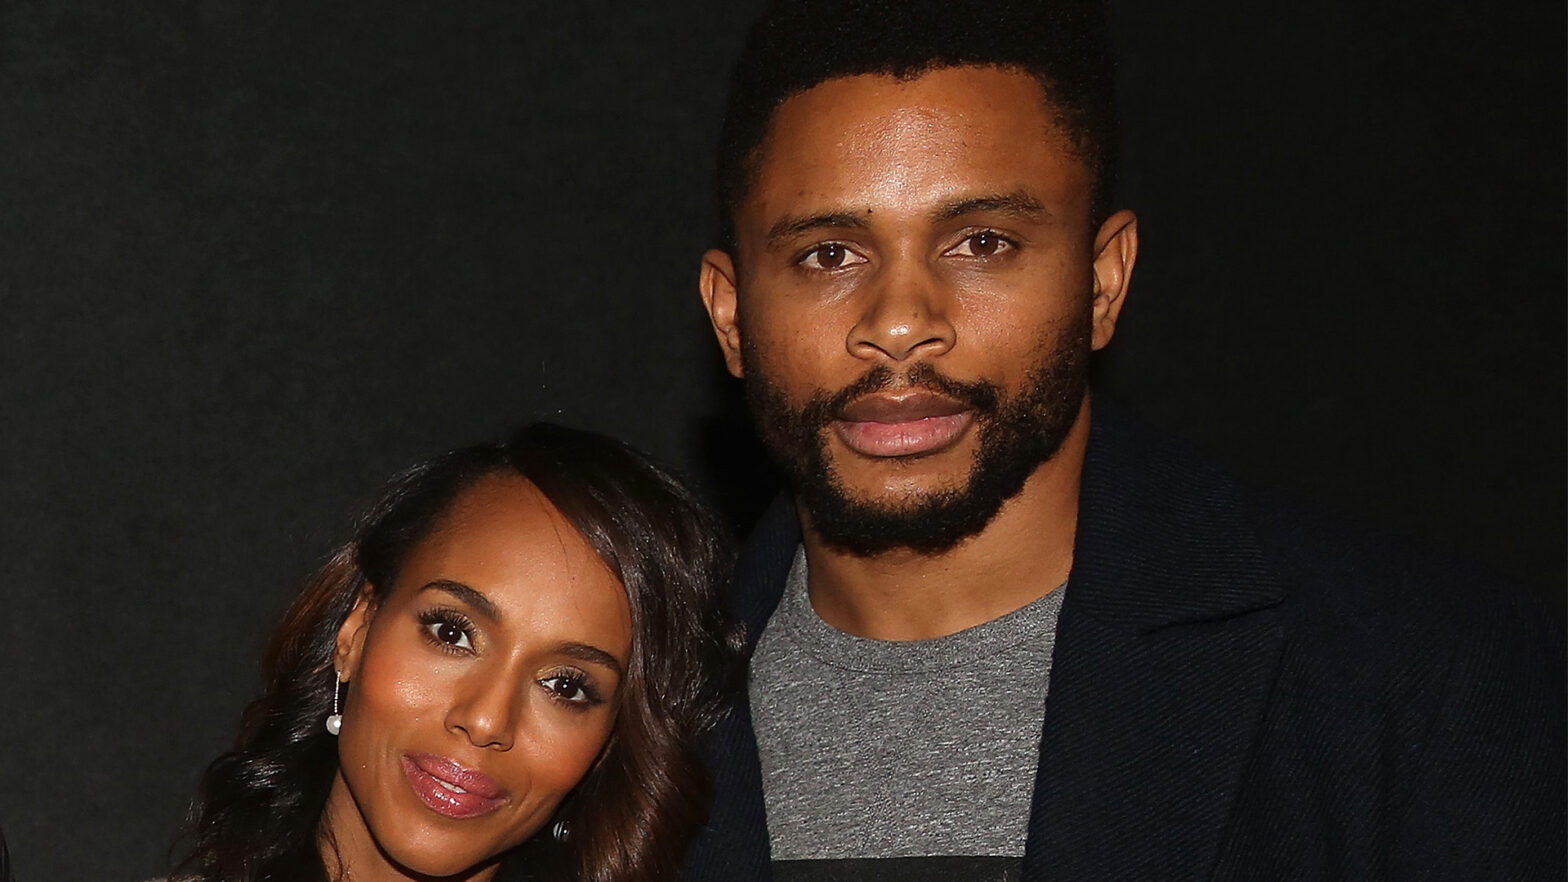 Kerry Washington Built An Estimated $50M Fortune, But Her Husband And 3 Kids Are 'Proof Of God' To Her